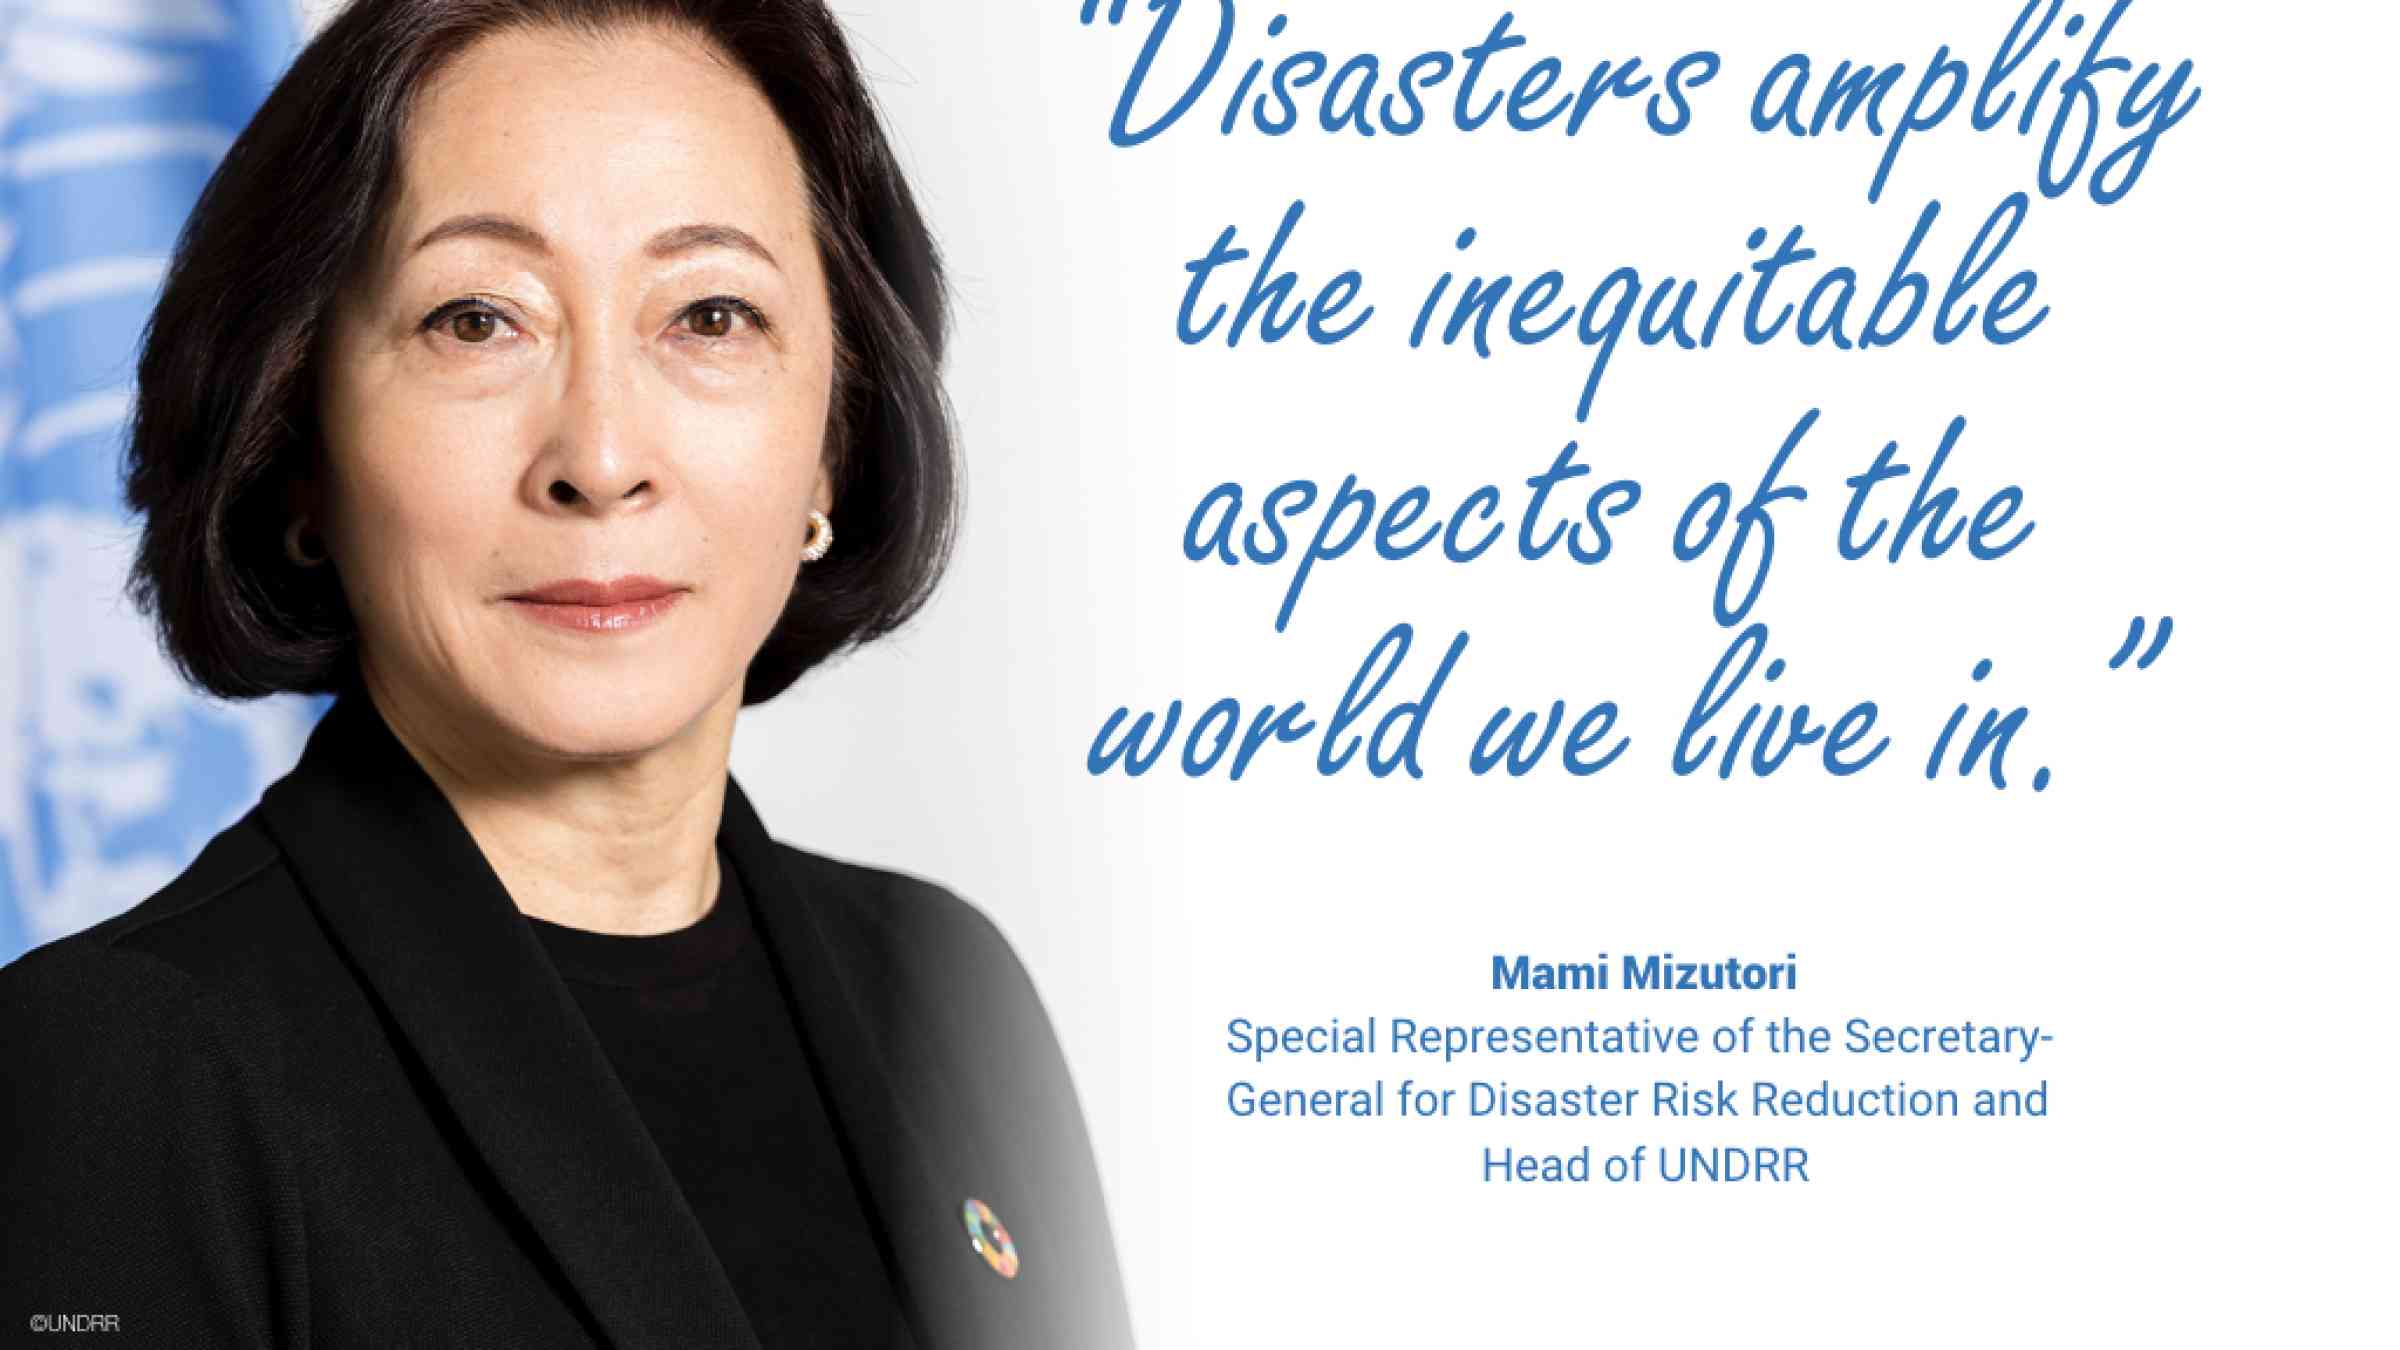 SRSG quote for IWD